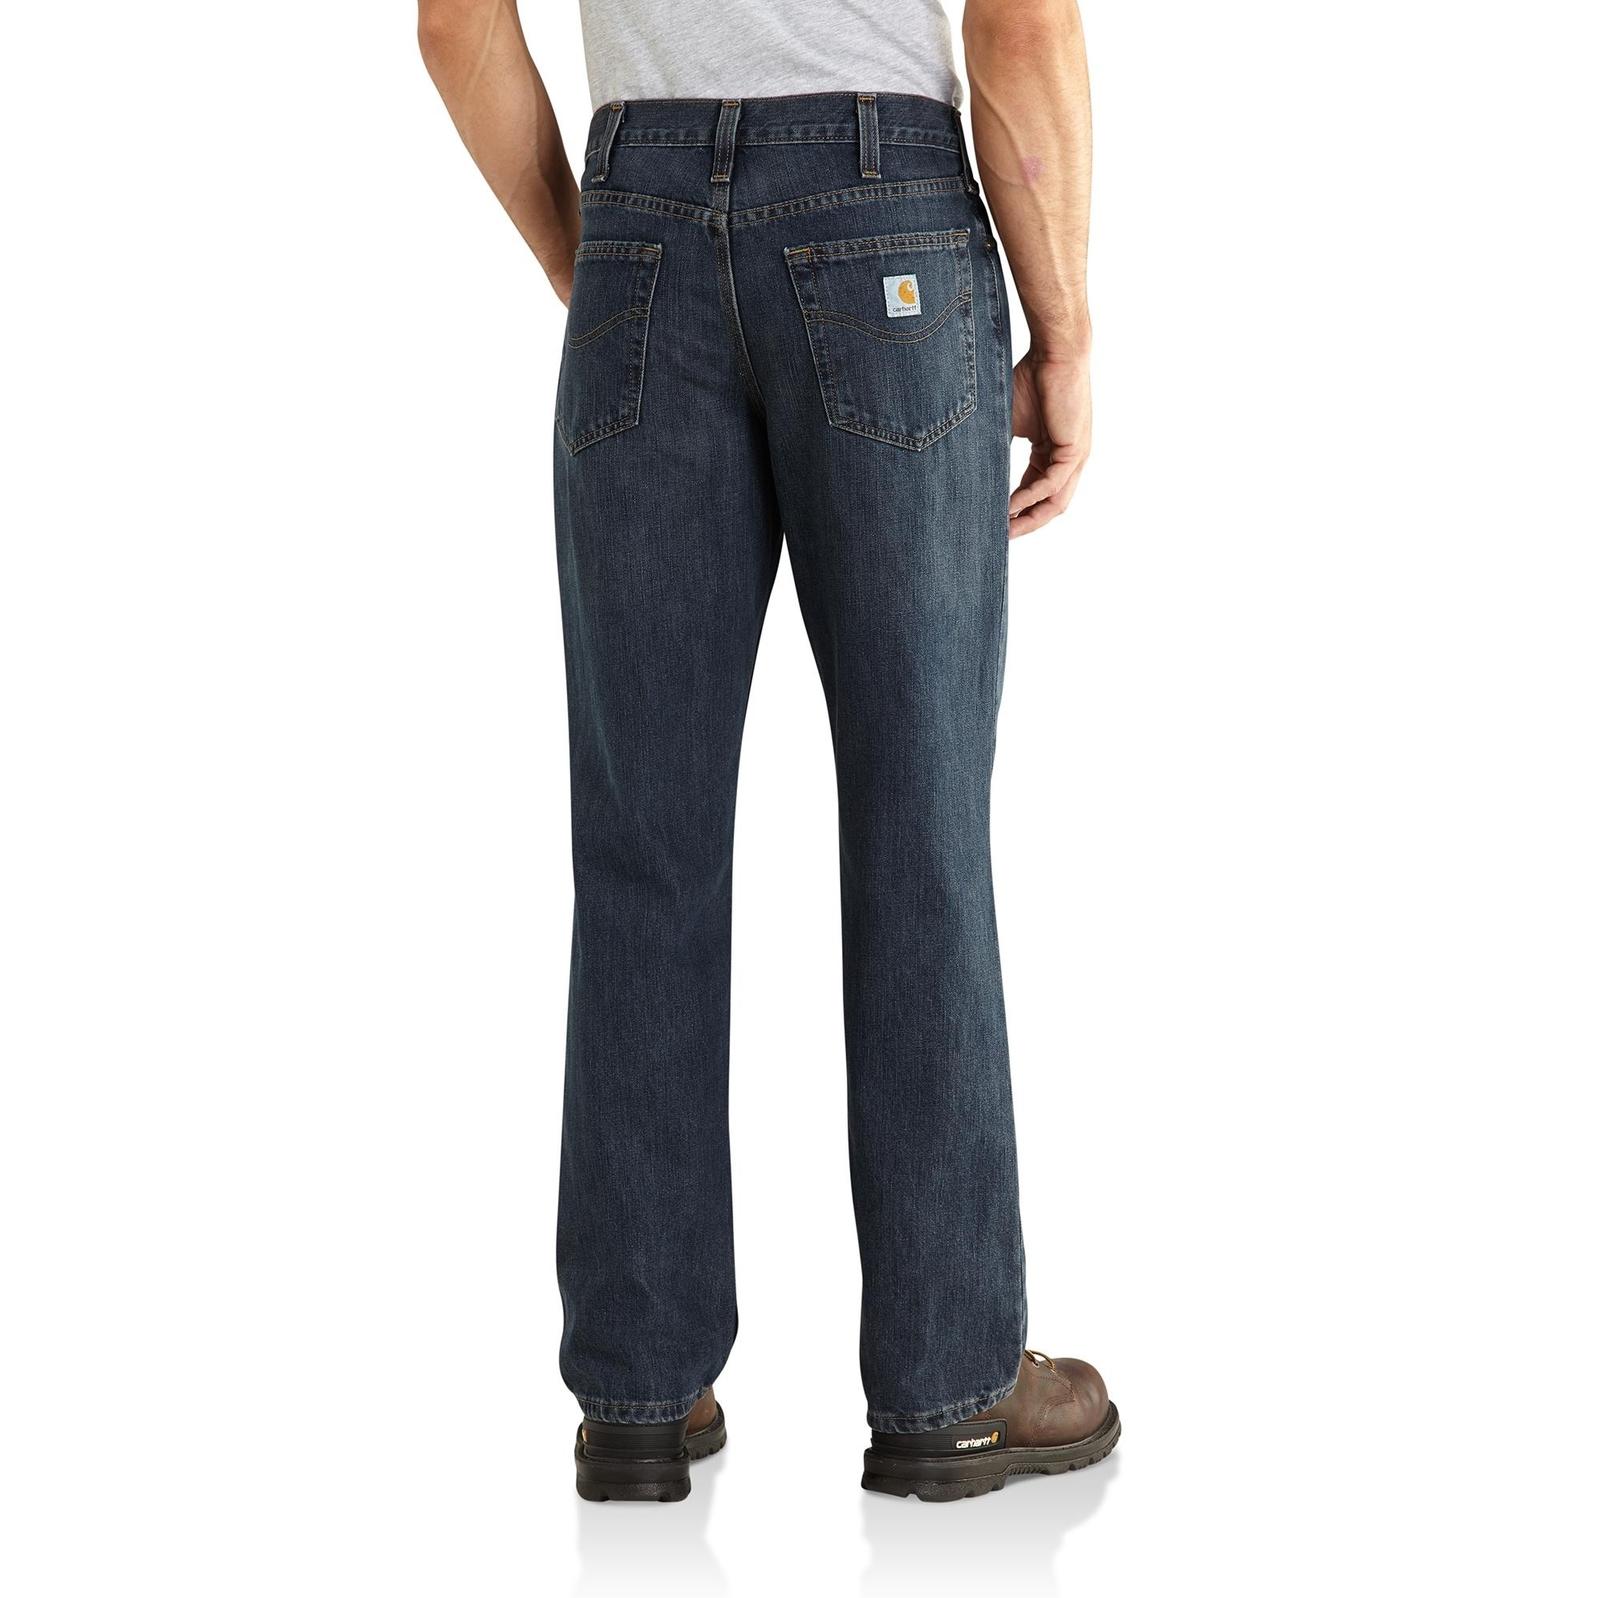 Carhartt Men's Relaxed Fit 5 Pocket Jeans in bedrock wash product on body back image